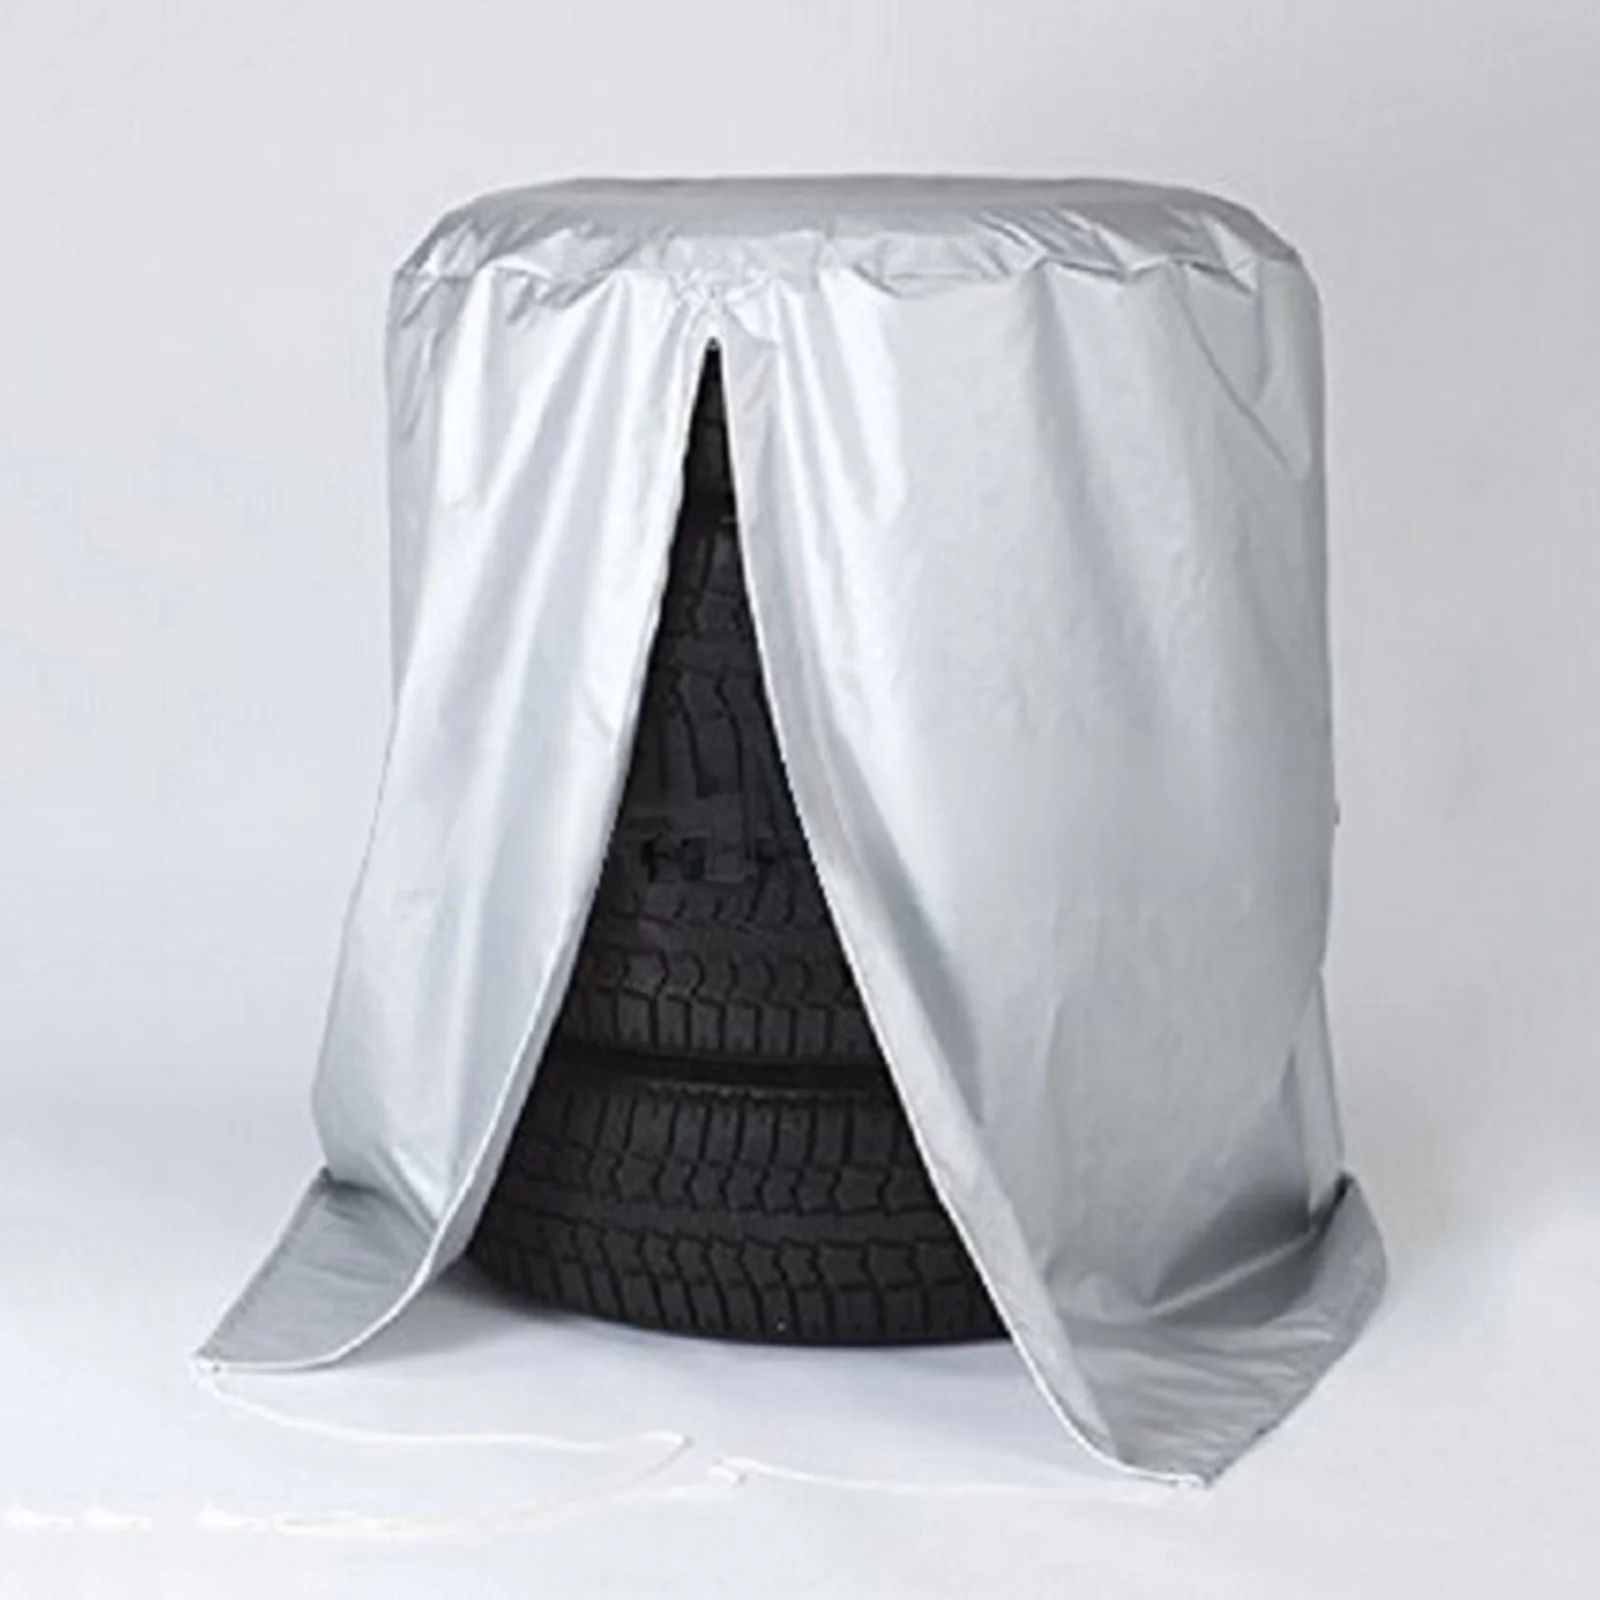 Large Tire Cover 4 Tires Capacity Drawstring Tote for D32.2